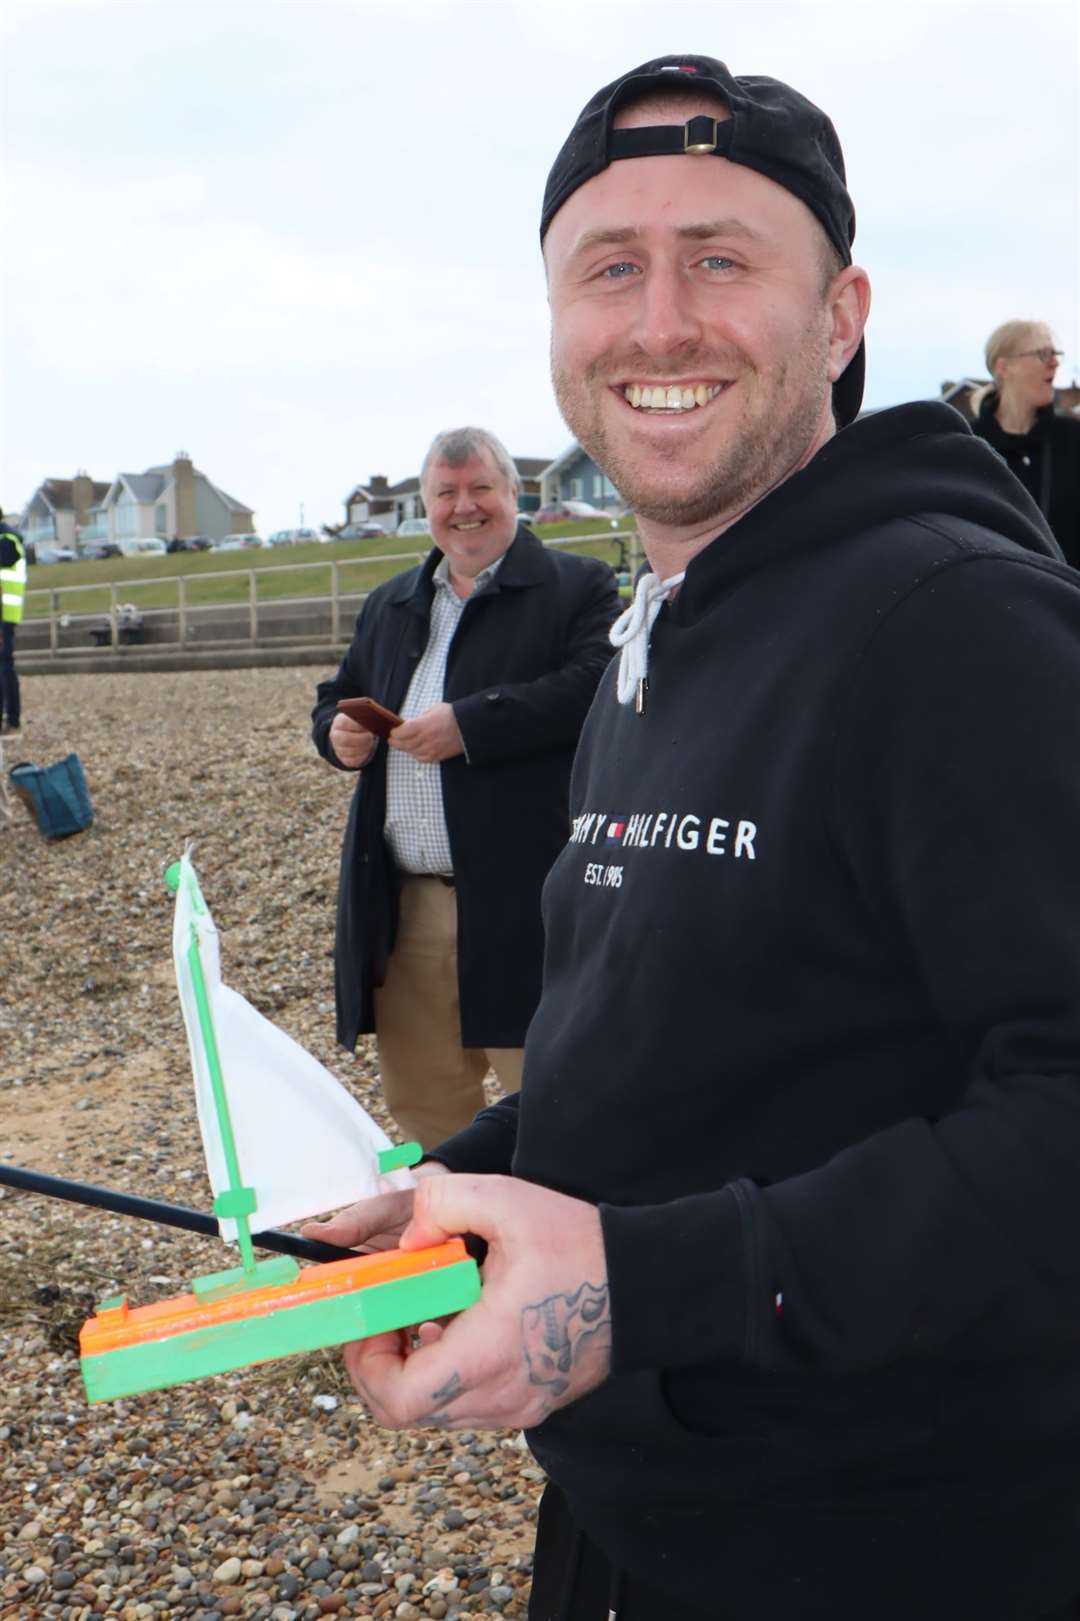 John South used a fishing rod to help propel his boat at Minster Leas for the launch of the Freemasons' Great East Kent Boat Race